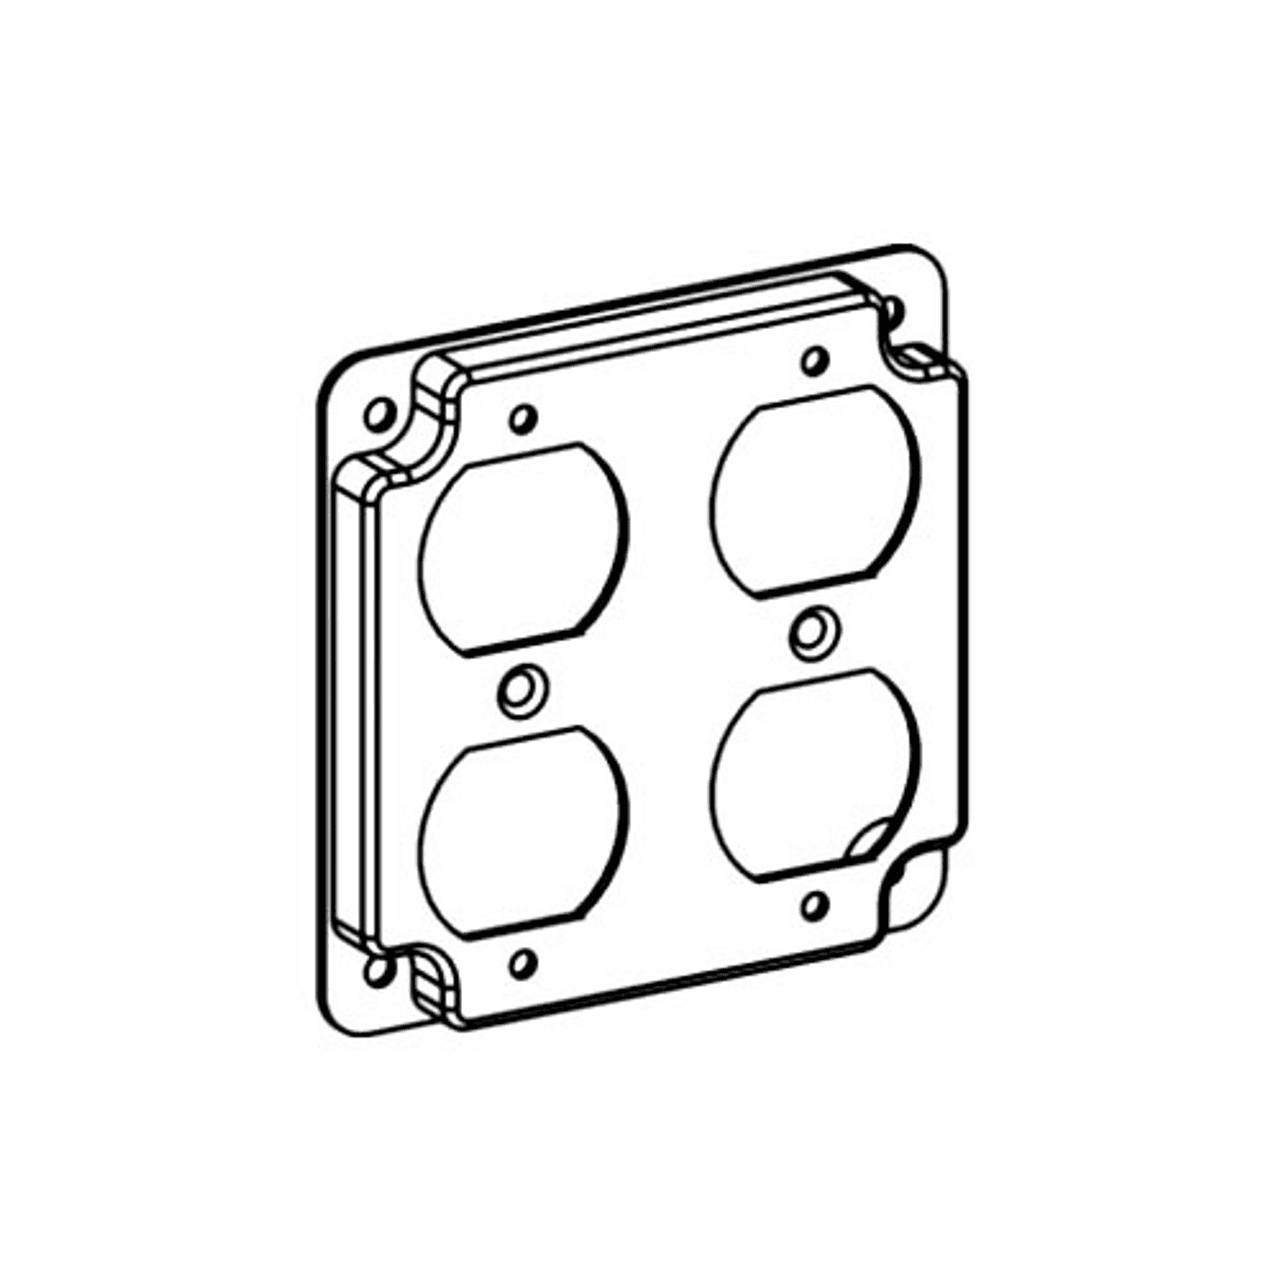 Orbit Industries 4422 RAISED 1/2”, 4” SQUARE (4S) 2 DUPLEX RECEPTACLES INDUSTRIAL COVER WITH CRUSHED CORNER